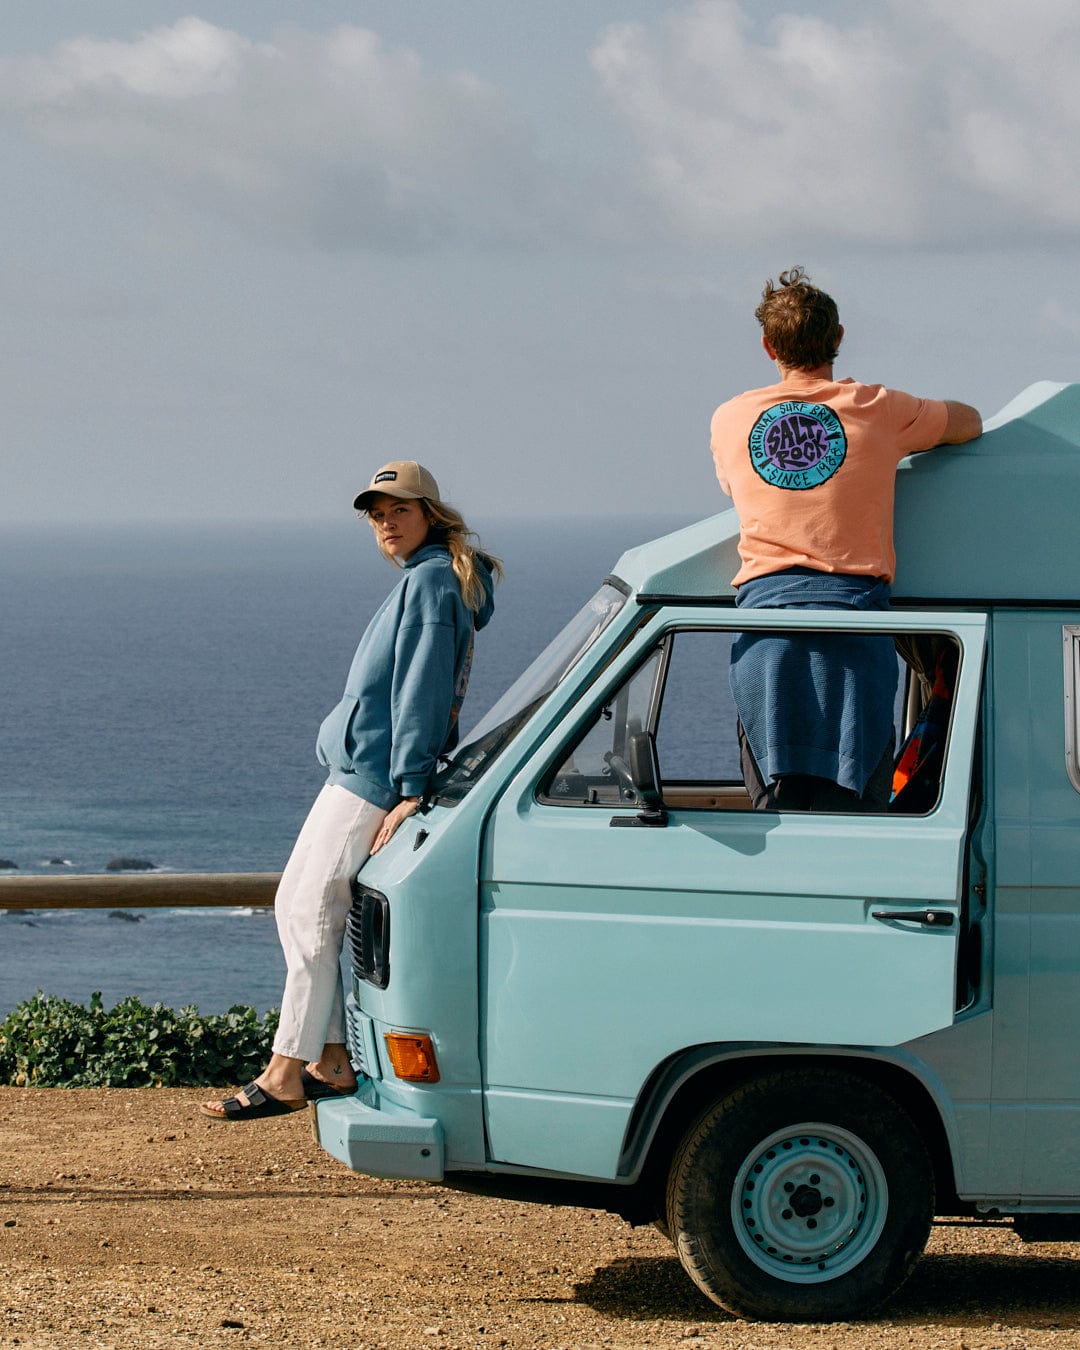 Two people leaning on an oversized blue van featuring a retro surf graphic, enjoying a scenic ocean view wearing Saltrock's SR Originals - Mens Short Sleeve T-Shirt in Peach.